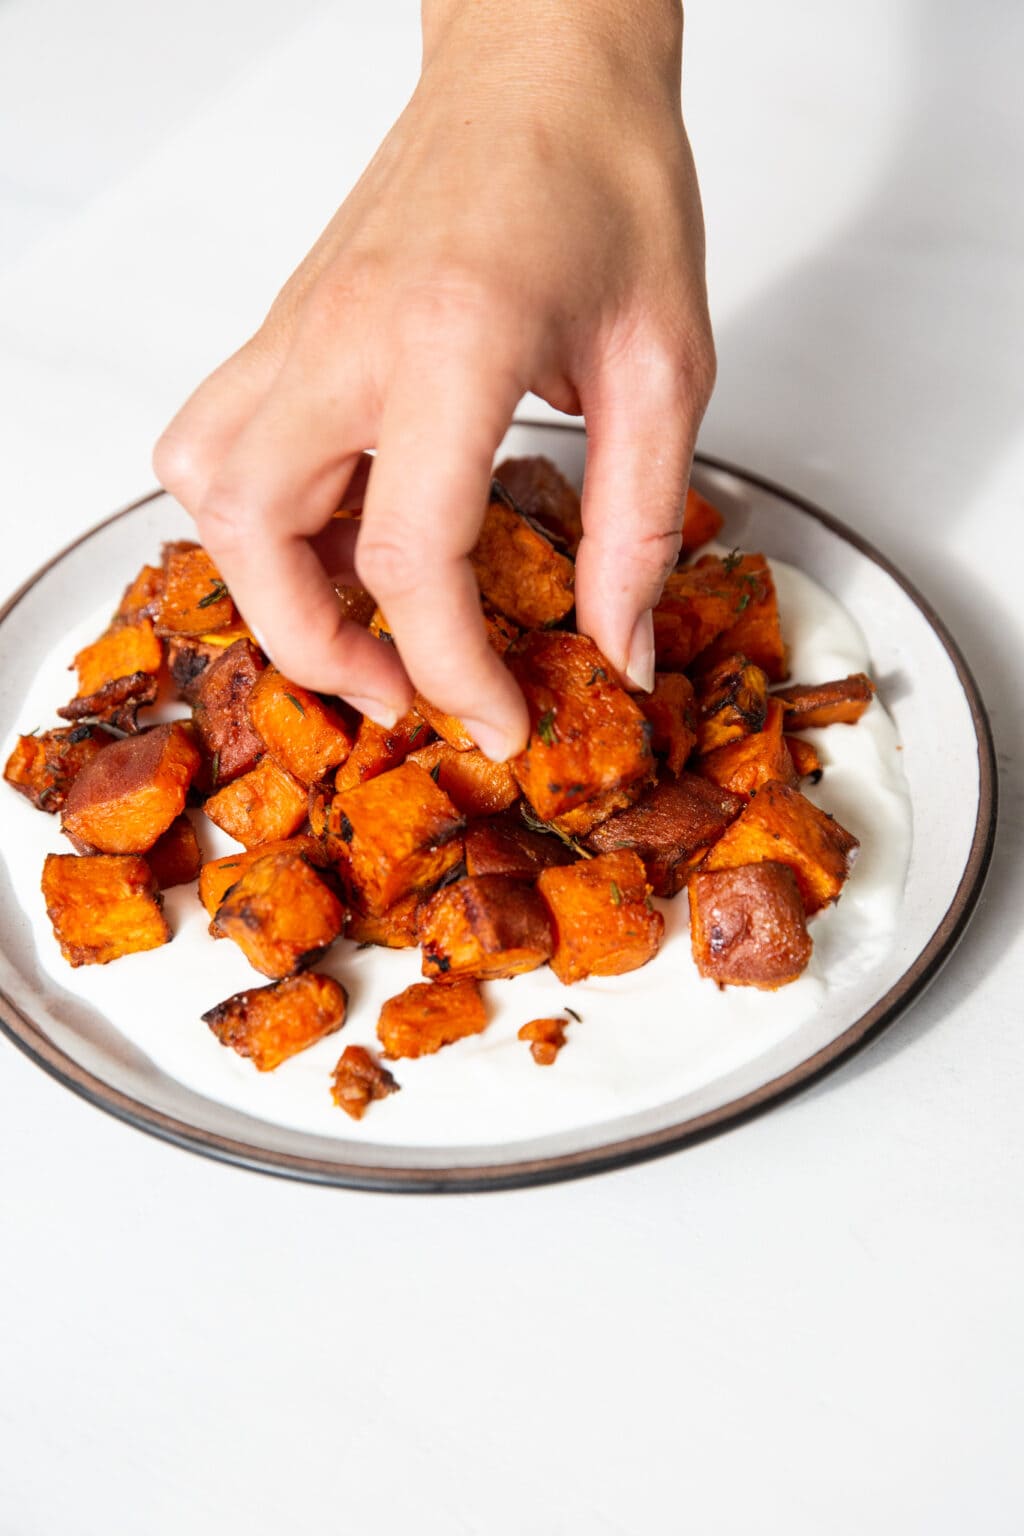 A hand is picking up a baked sweet potato cube on a white plate with a brown rim.